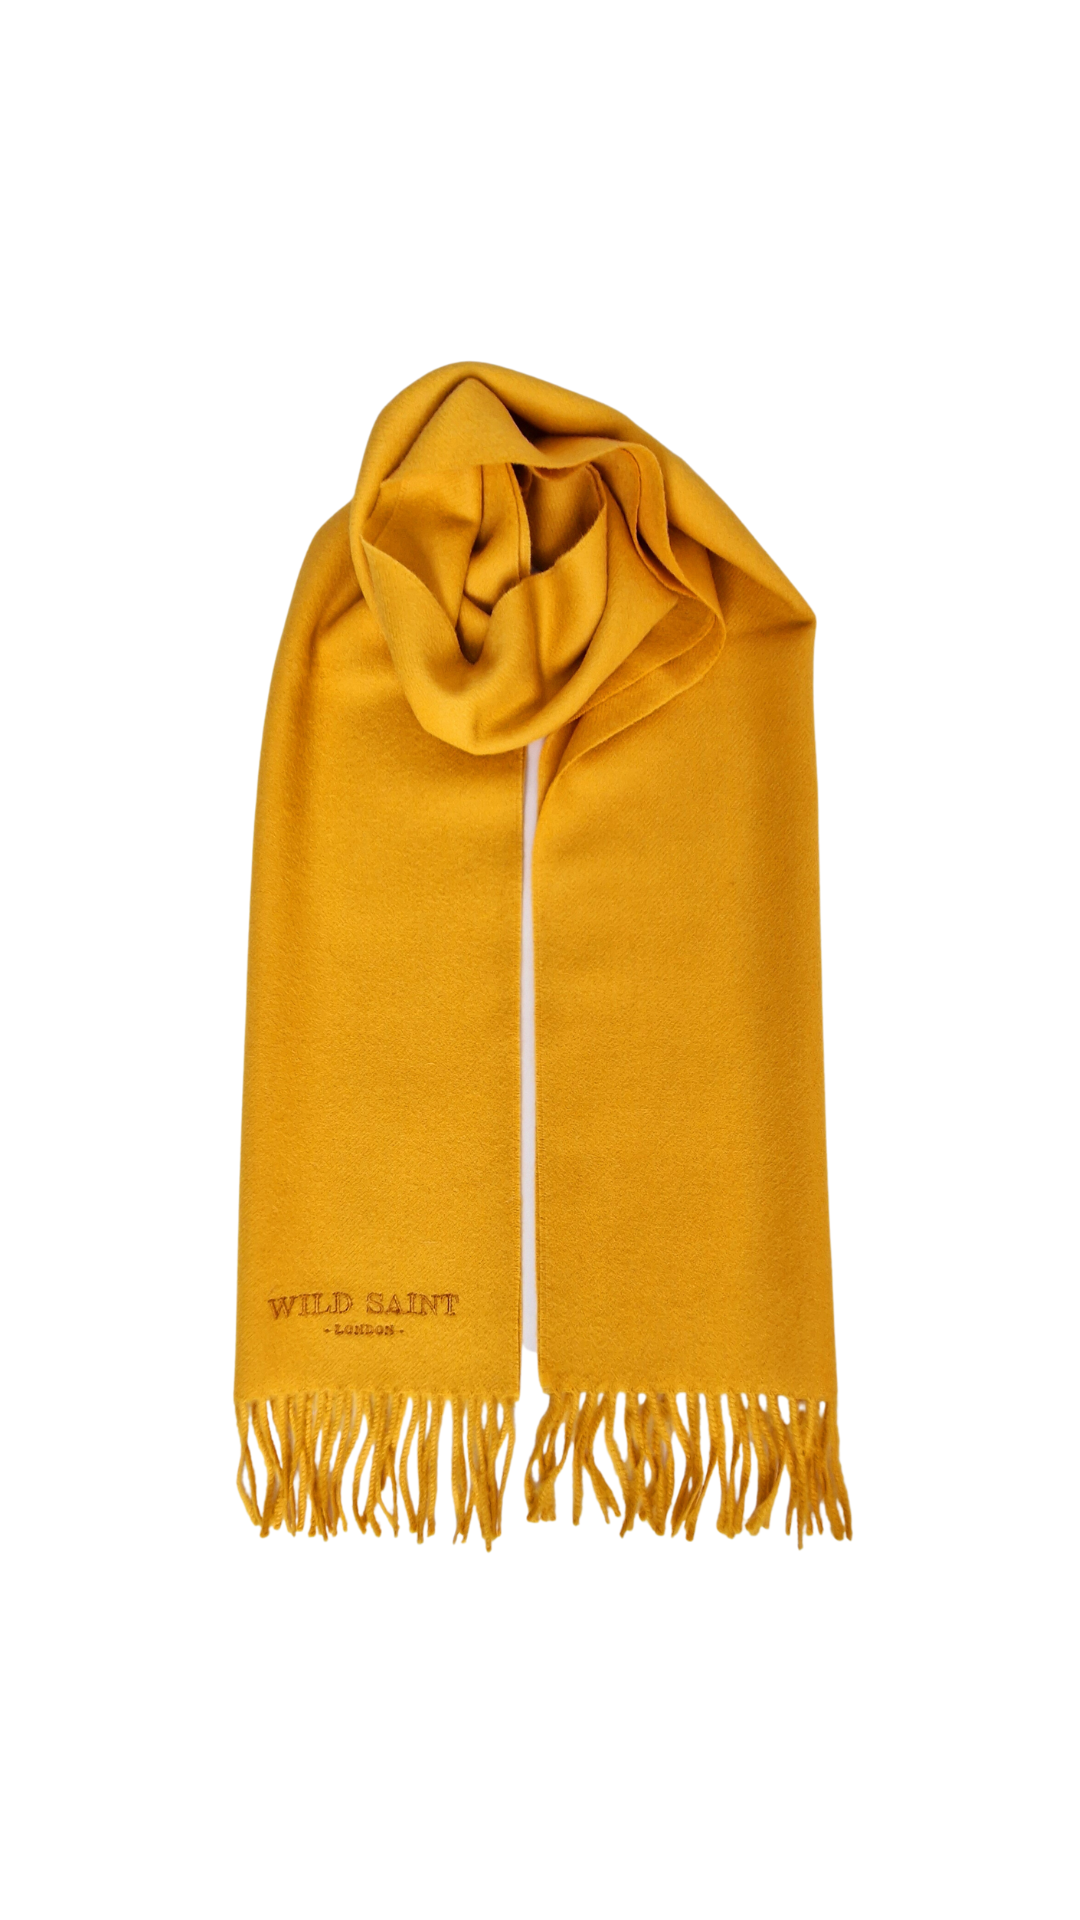 Sunflower Yellow medium weight 100% baby alpaca scarf for women and men. Includes complimentary personlisation. Sustainable Luxury designer scarf